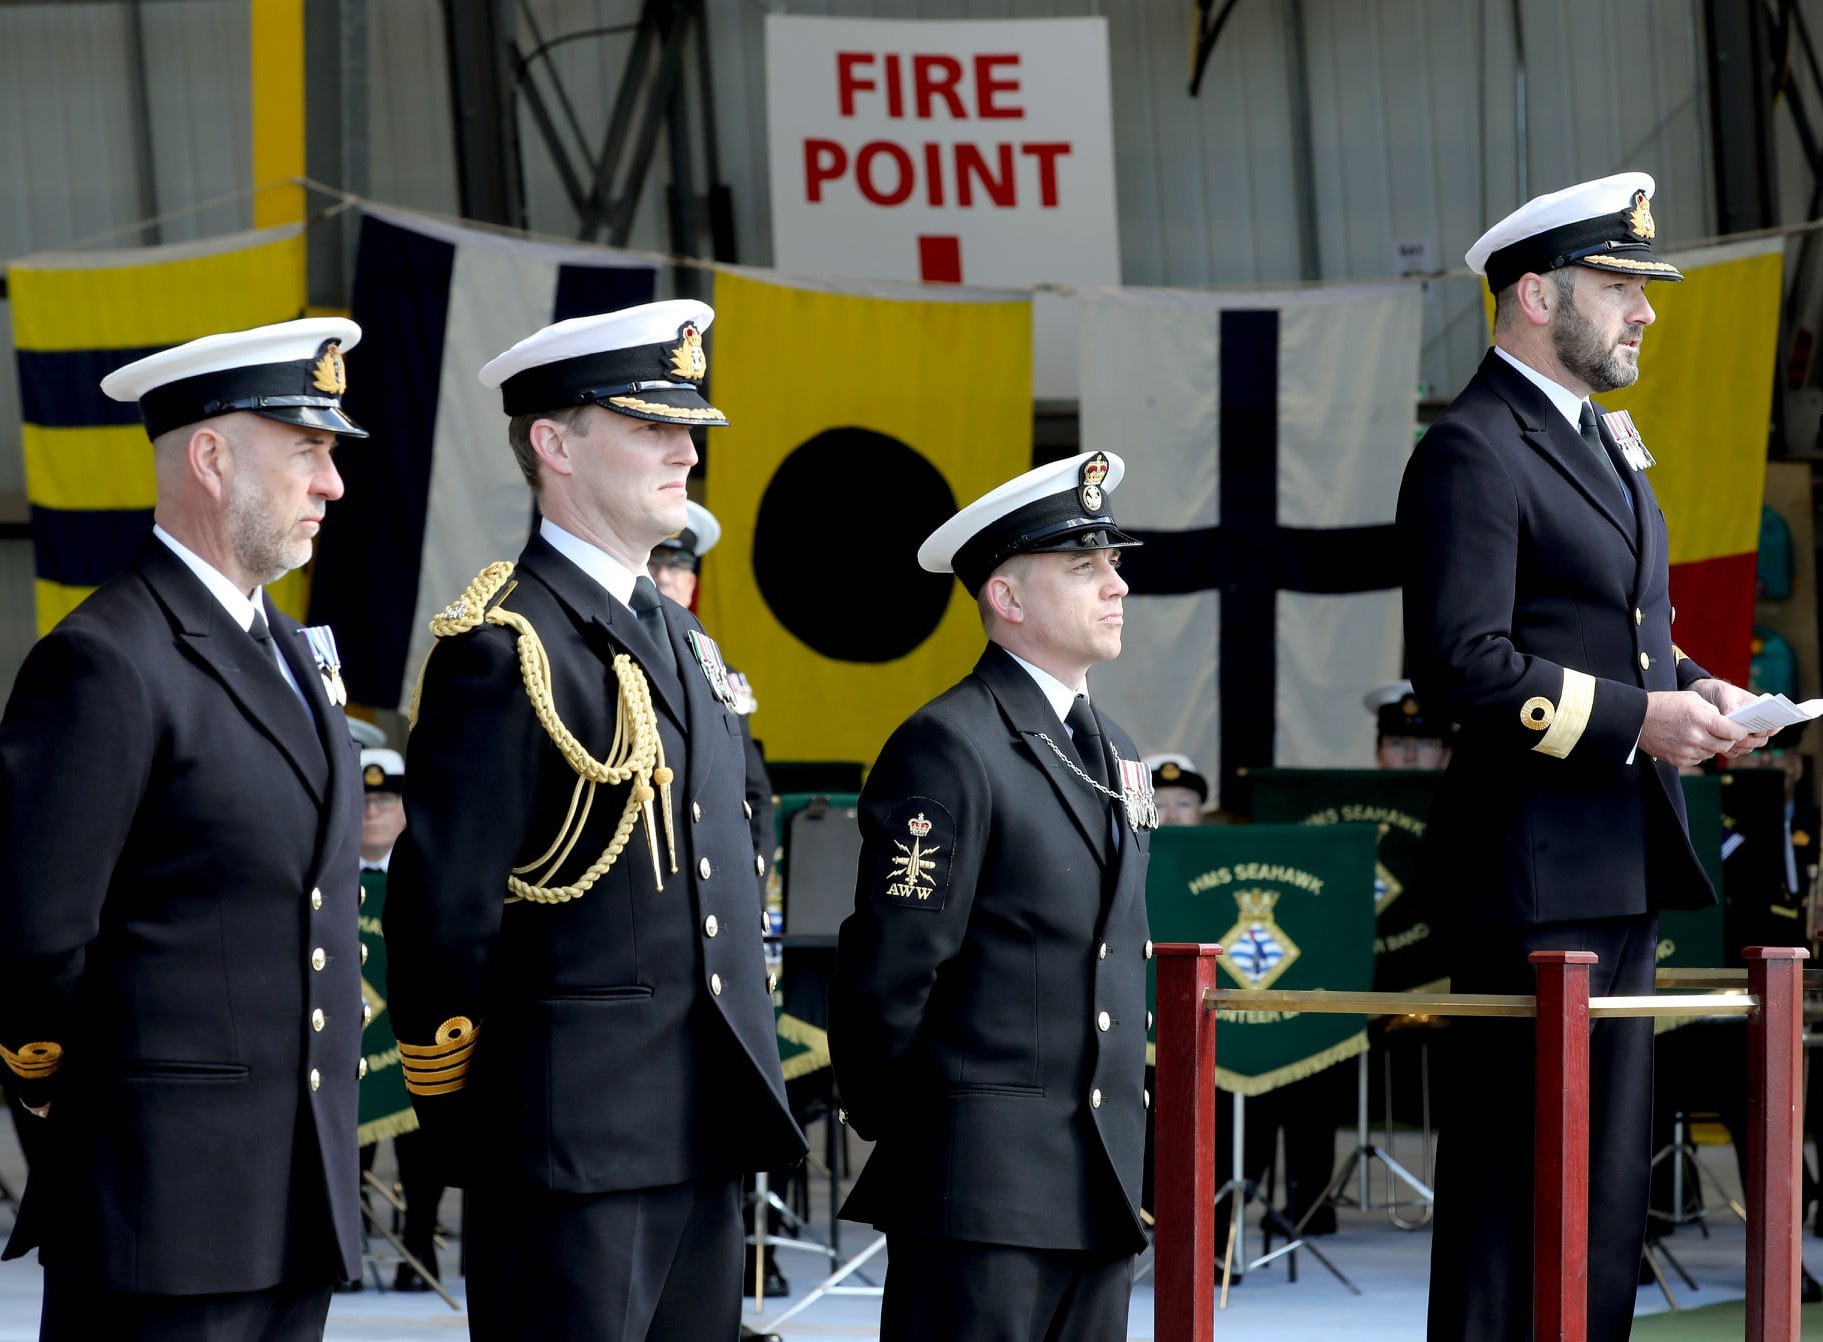 Pictures: Royal Navy/PO A’Barrow